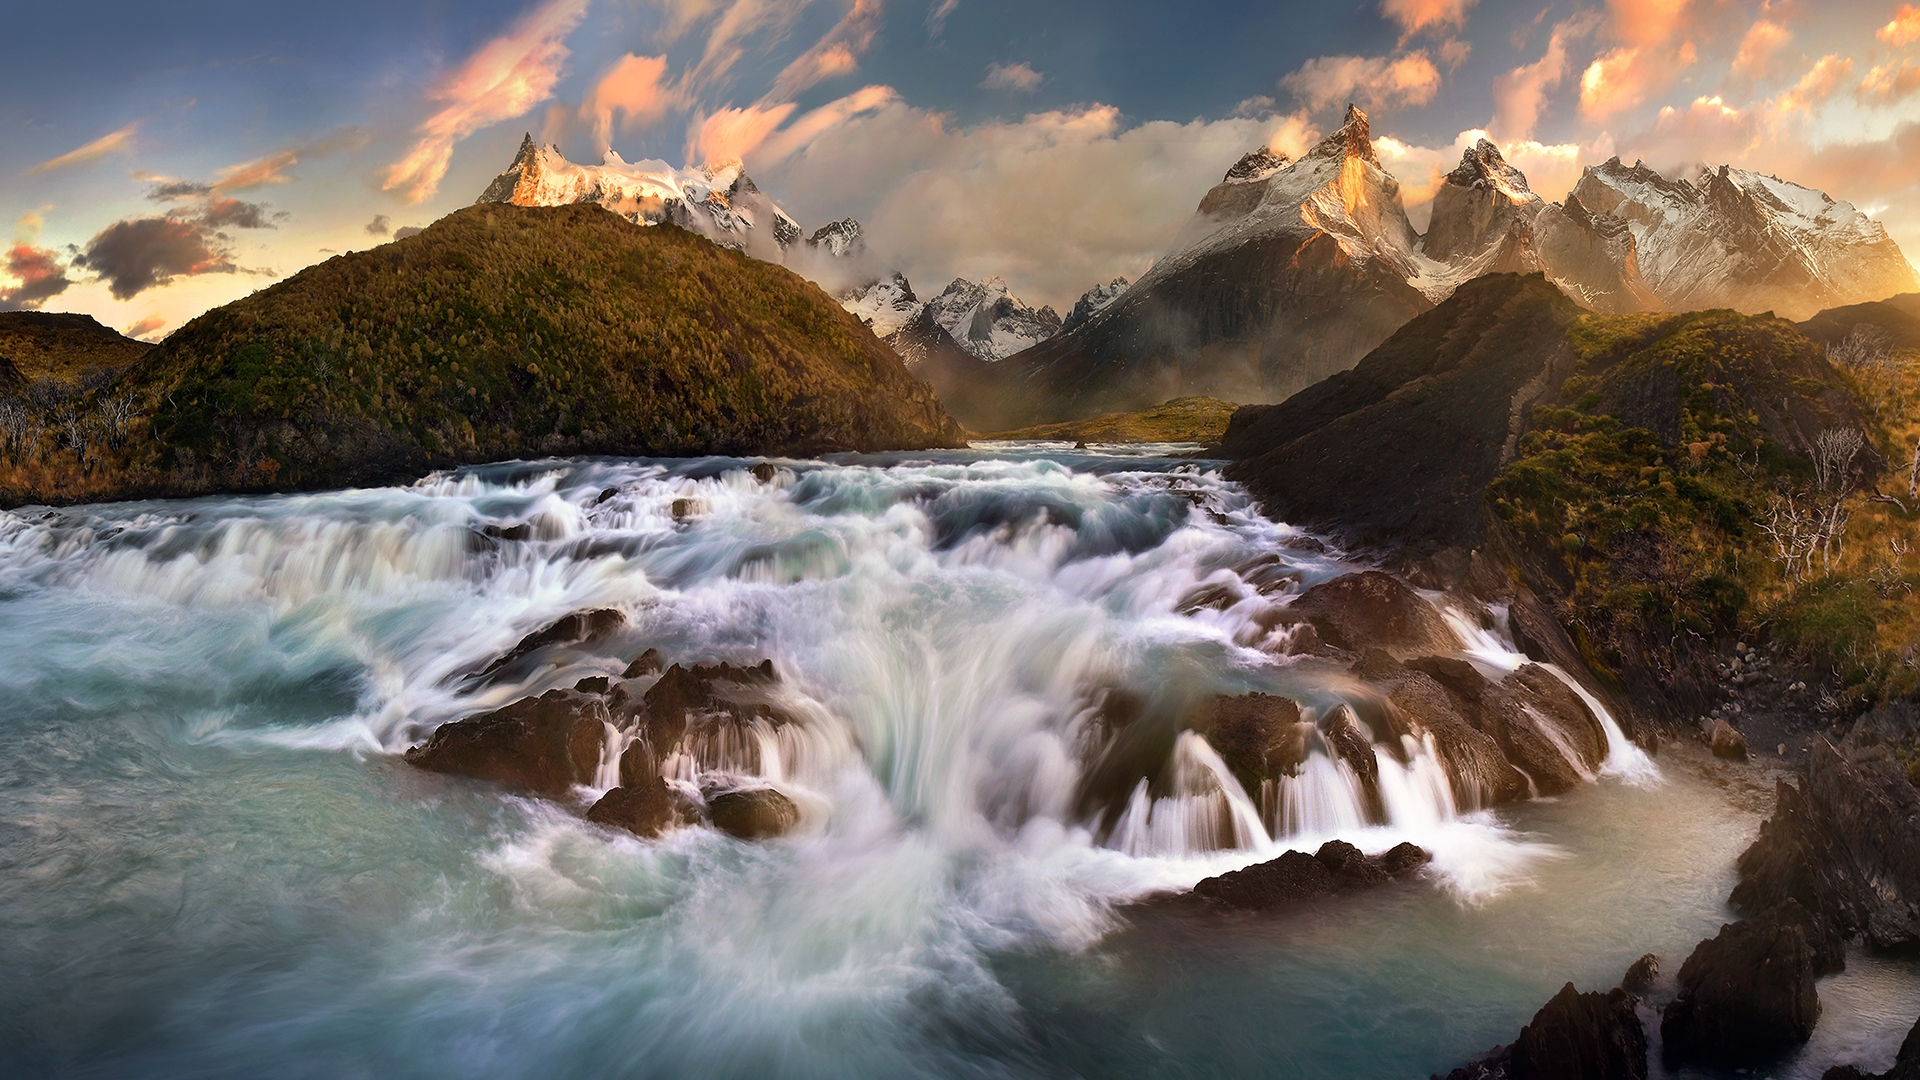 Wallpapers wallpaper mountains river clouds on the desktop